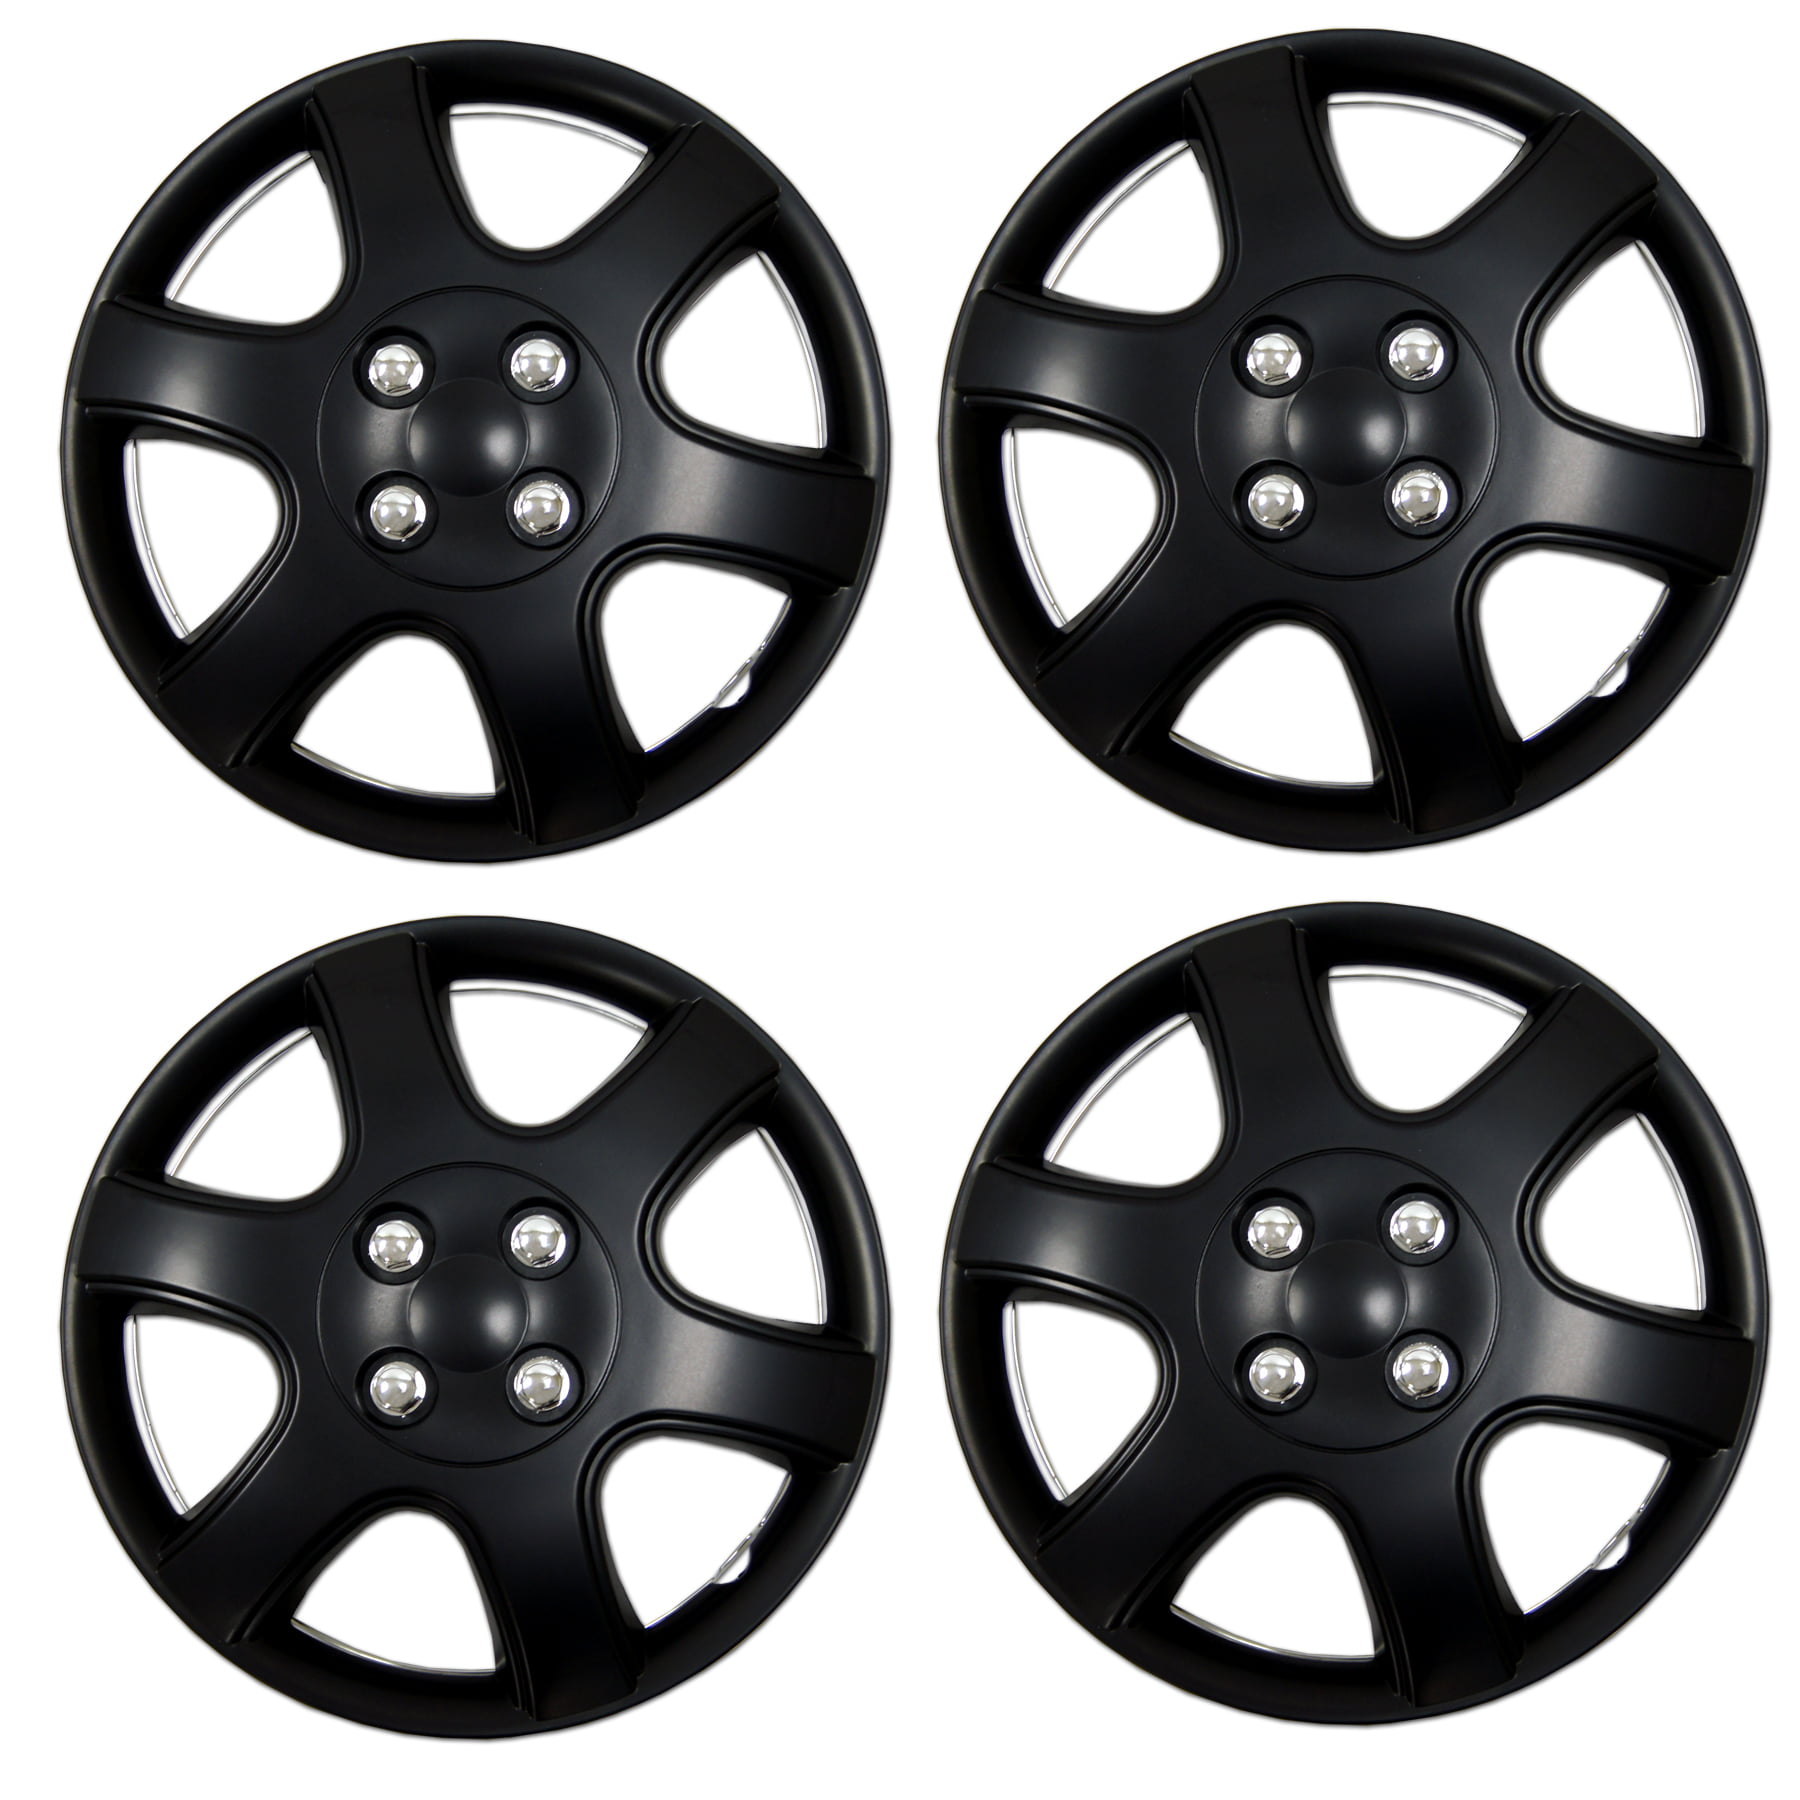 4pcs Set of 14 inch Wheel Rim Skin Cover Hubcap Hub caps 14" Inches Style#888 